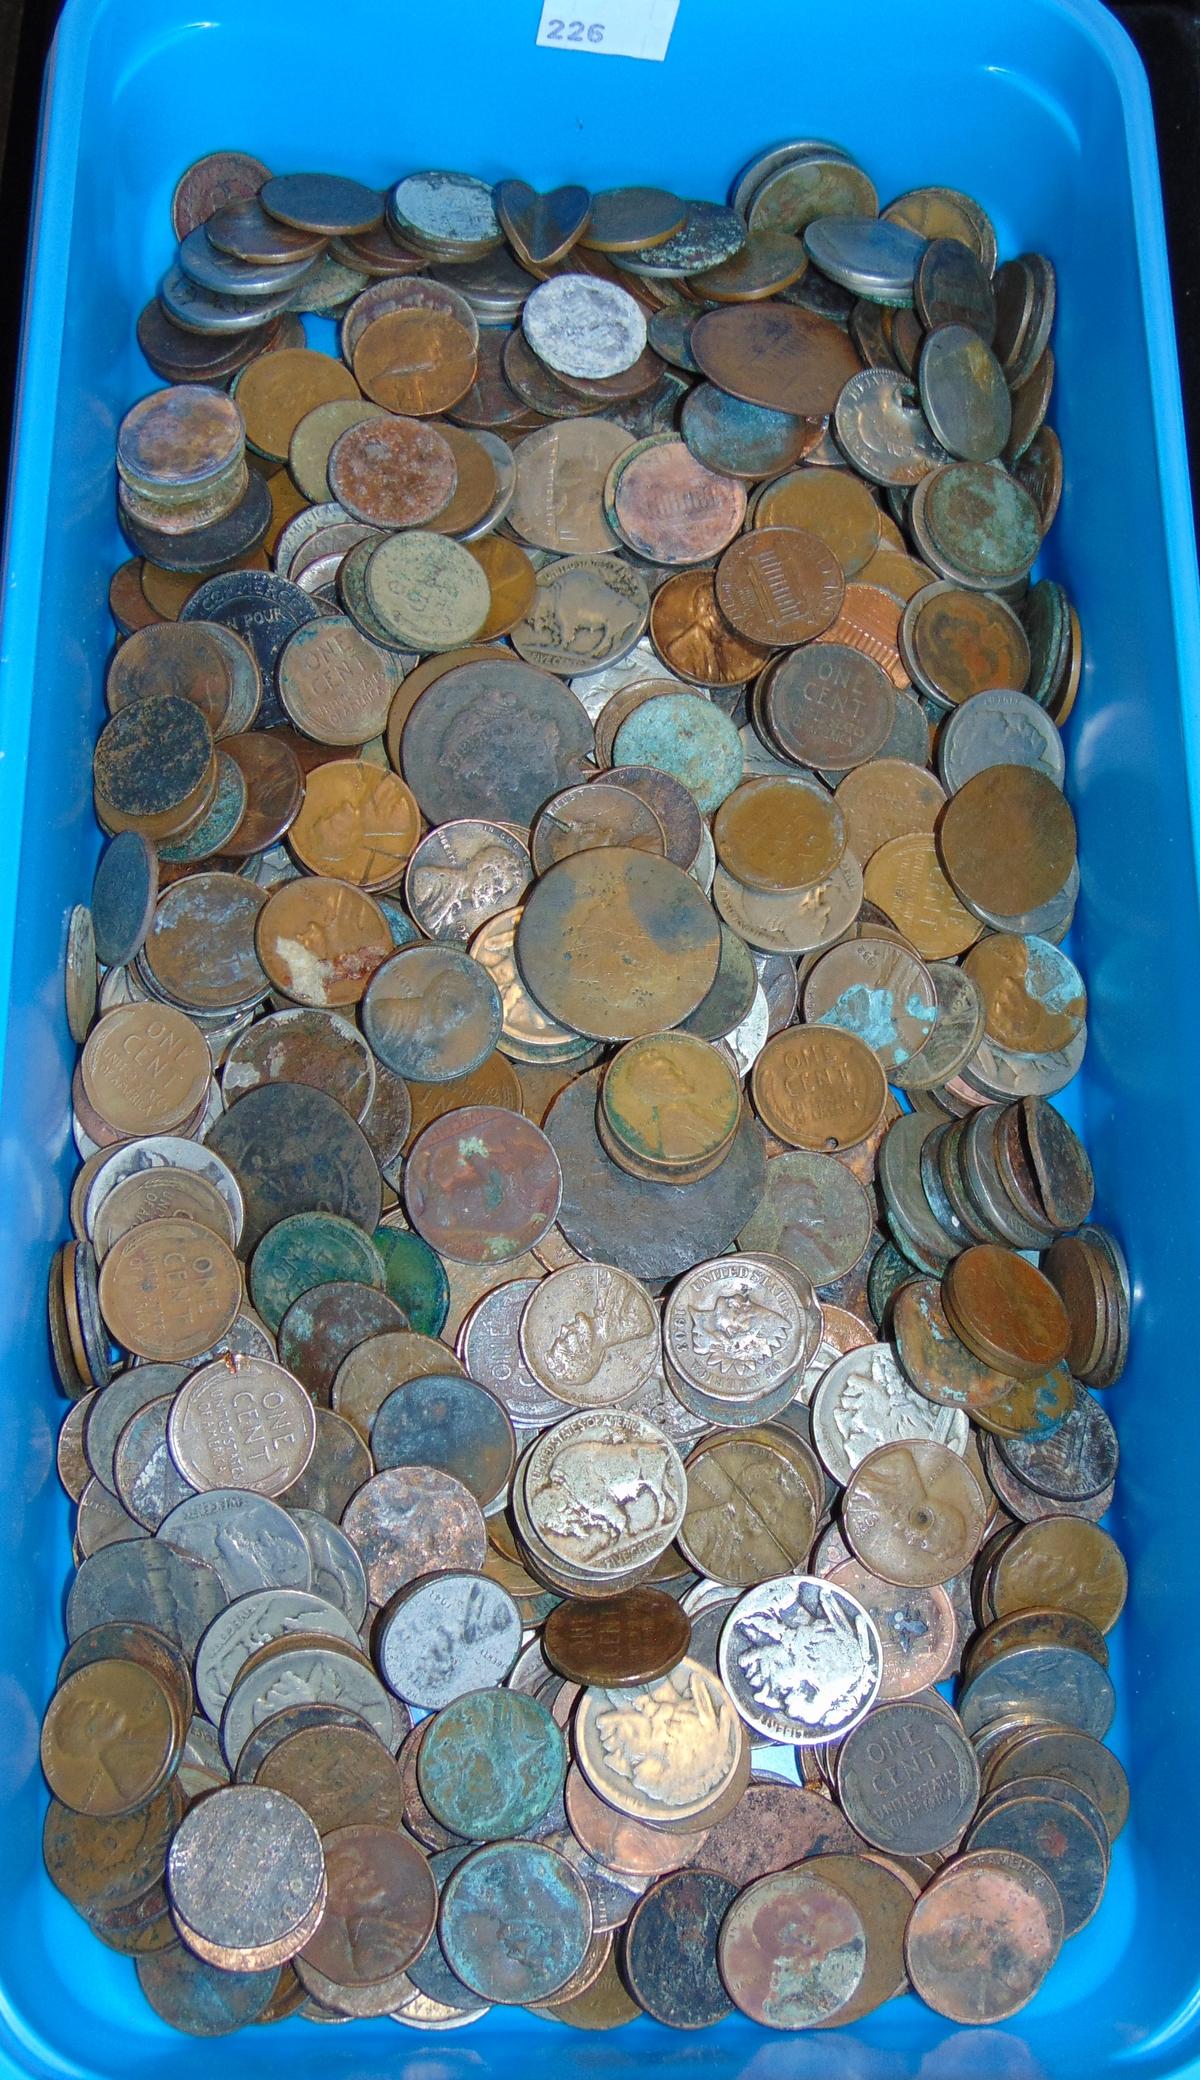 Approx. 555 Culls: Cents, Nickels, Lg. Cents, more